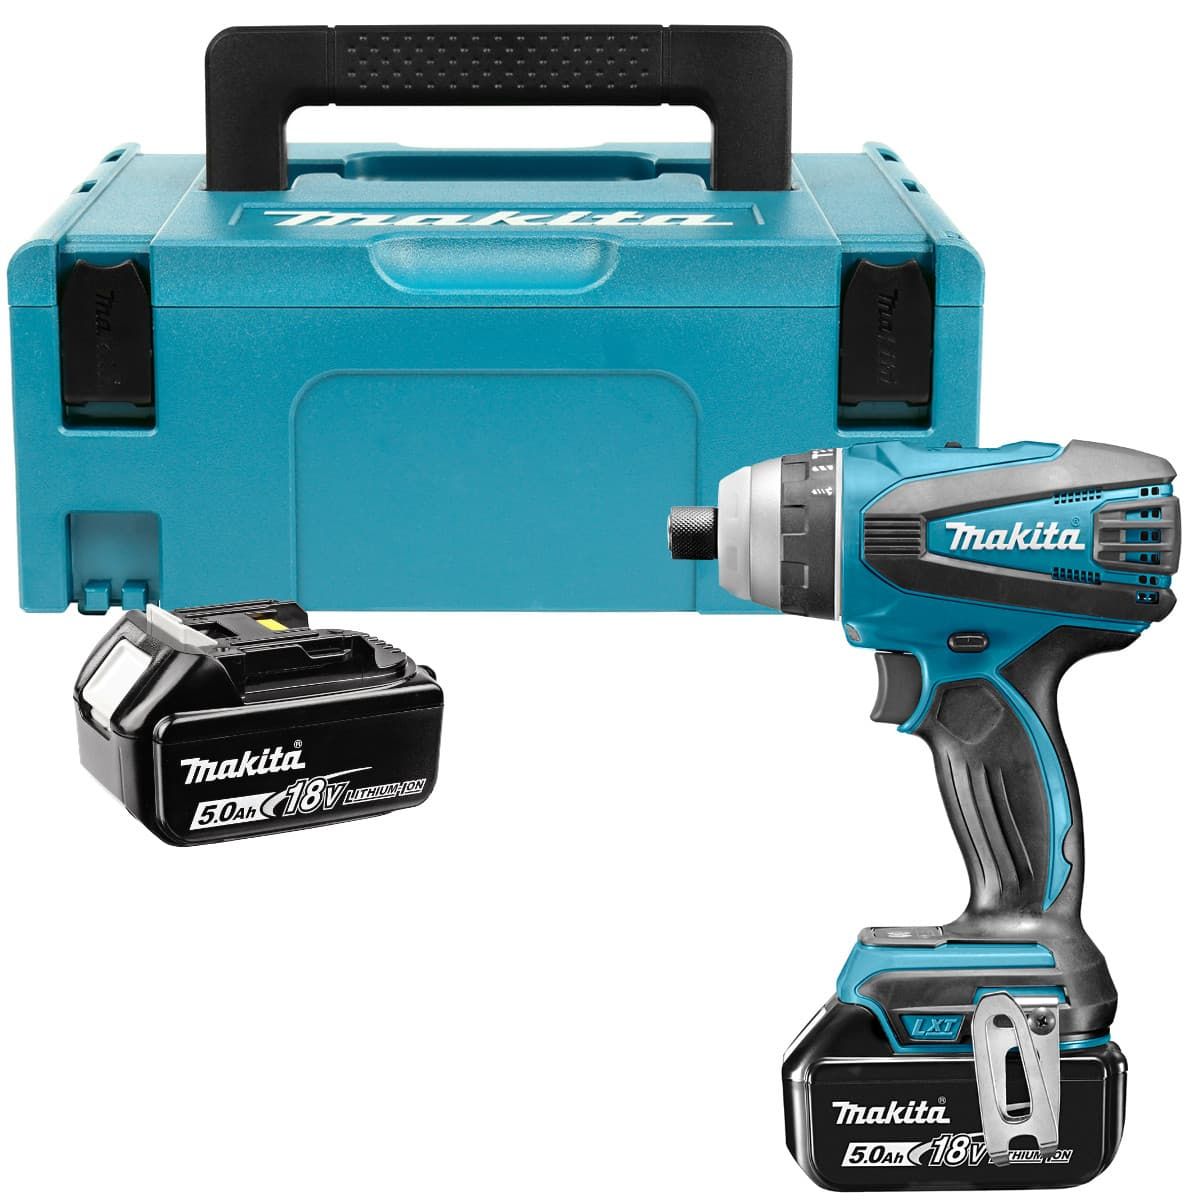 Makita DTP141RTJ hybride accuklopboormachine 18V 5,0Ah + Mbox